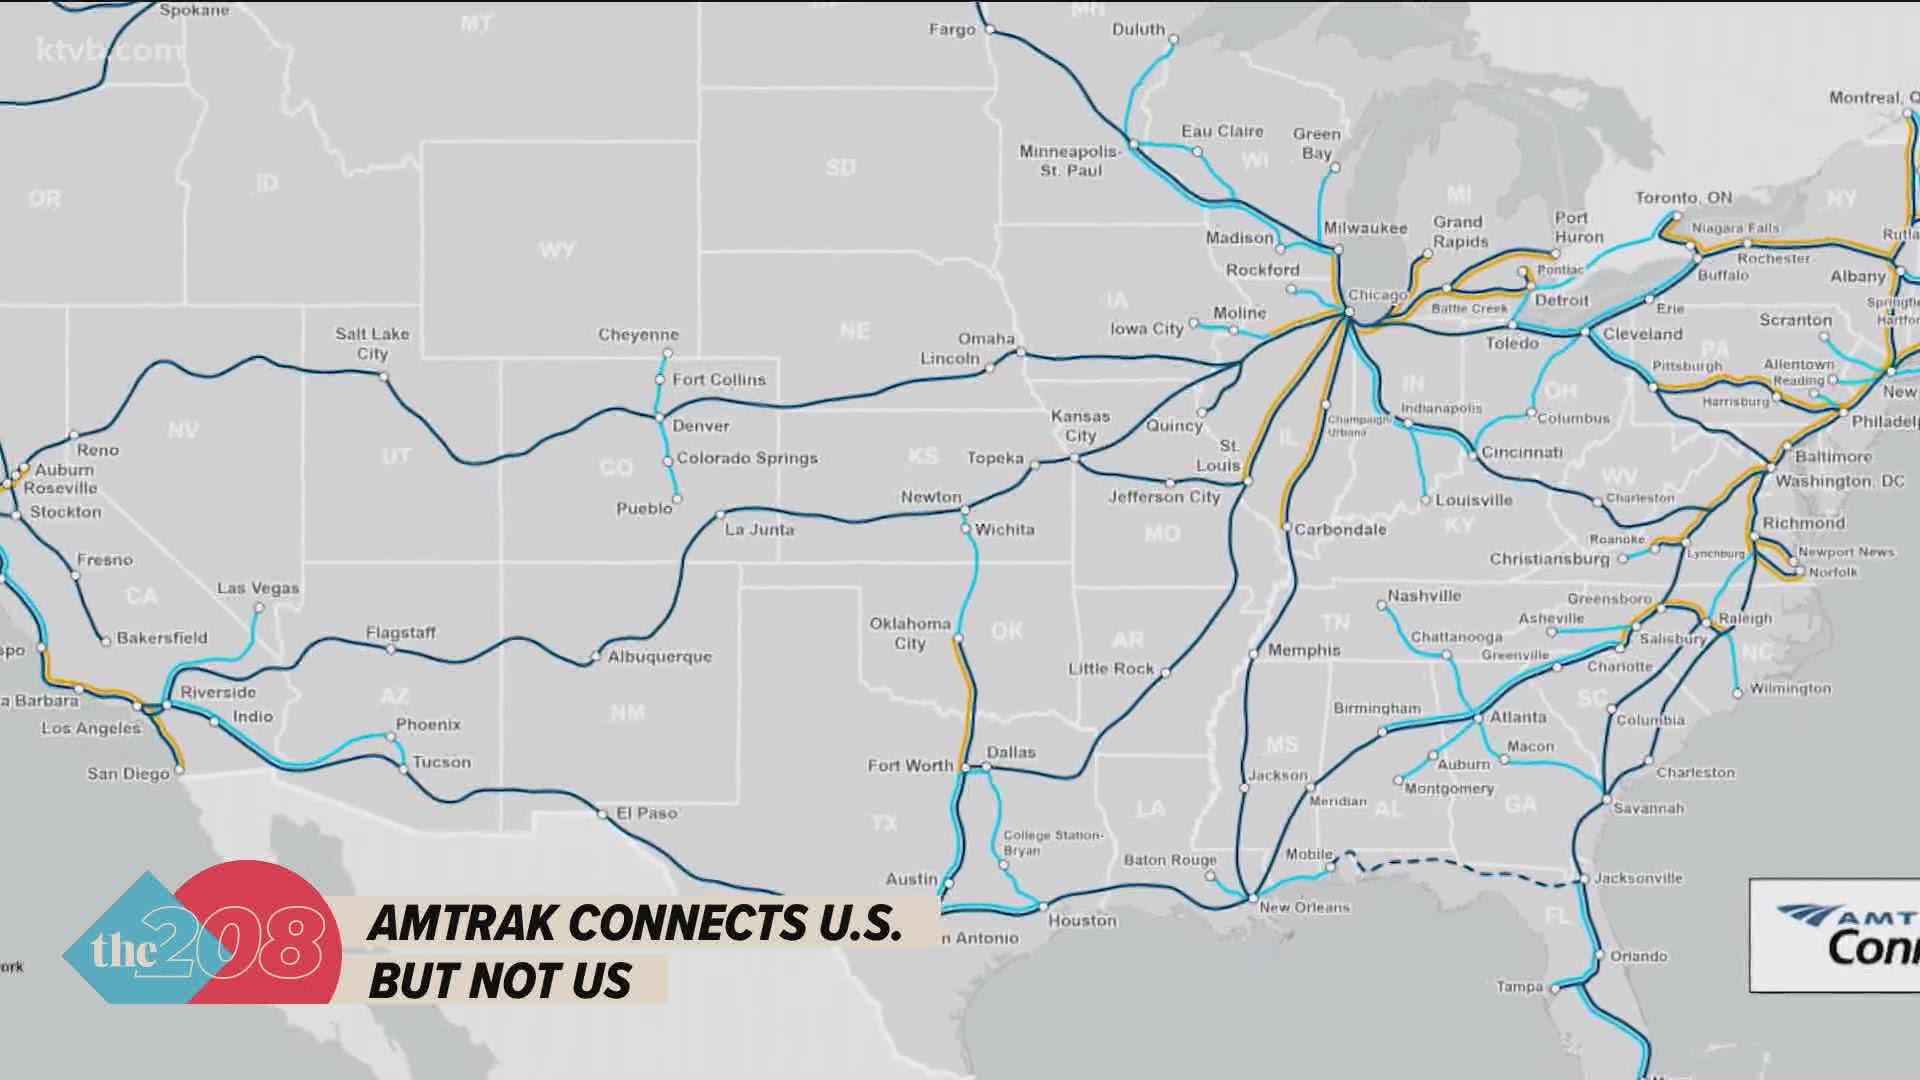 There are currently no plans by Amtrak to expand passenger train service into Idaho.